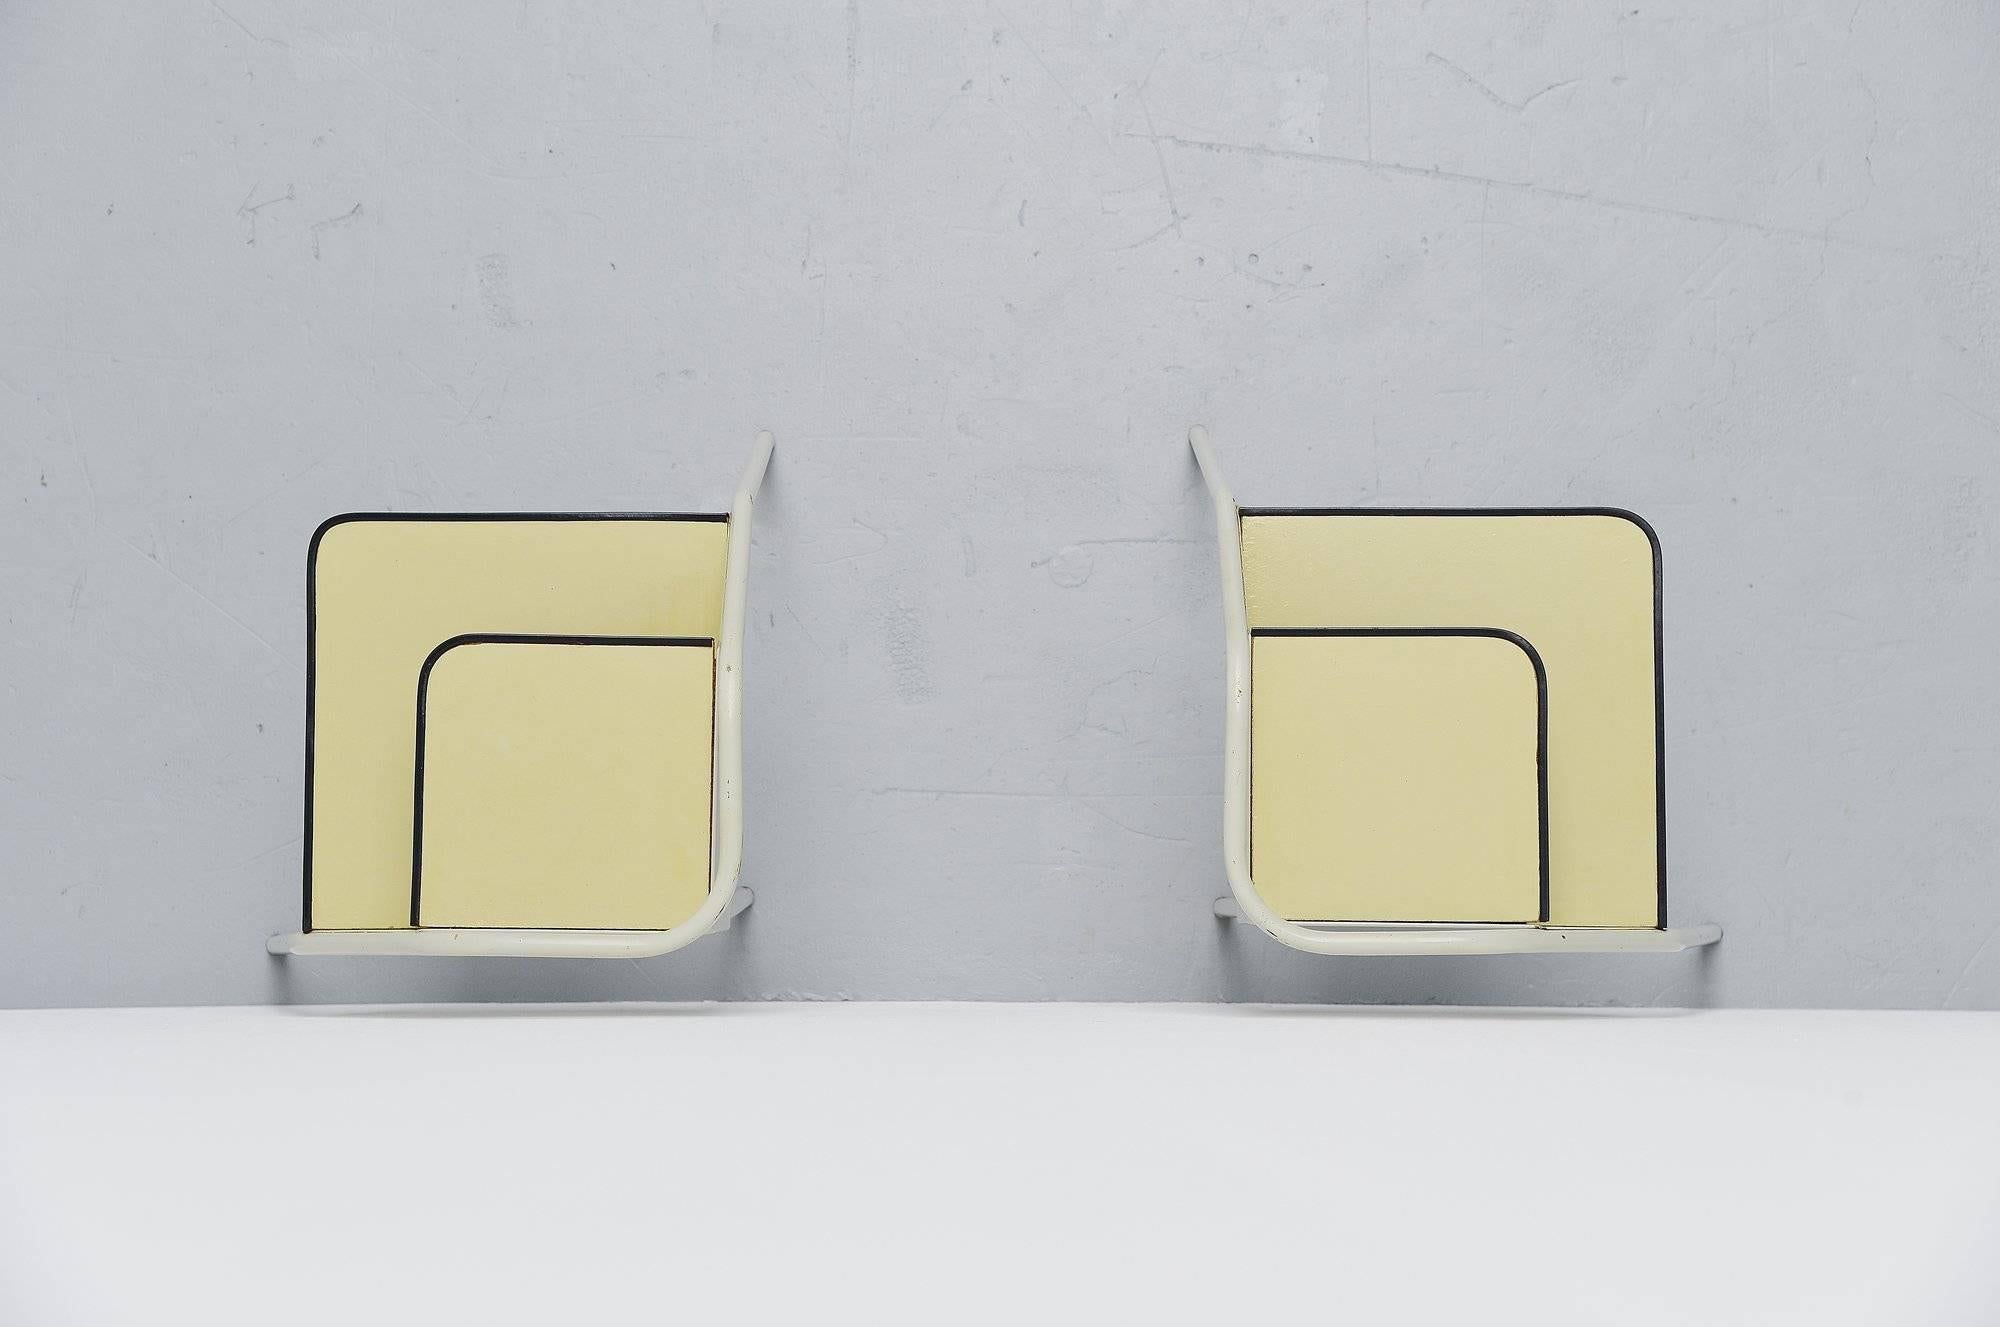 Cold-Painted Pair of Dutch Modernist Industrial Nightstands, Holland, 1960